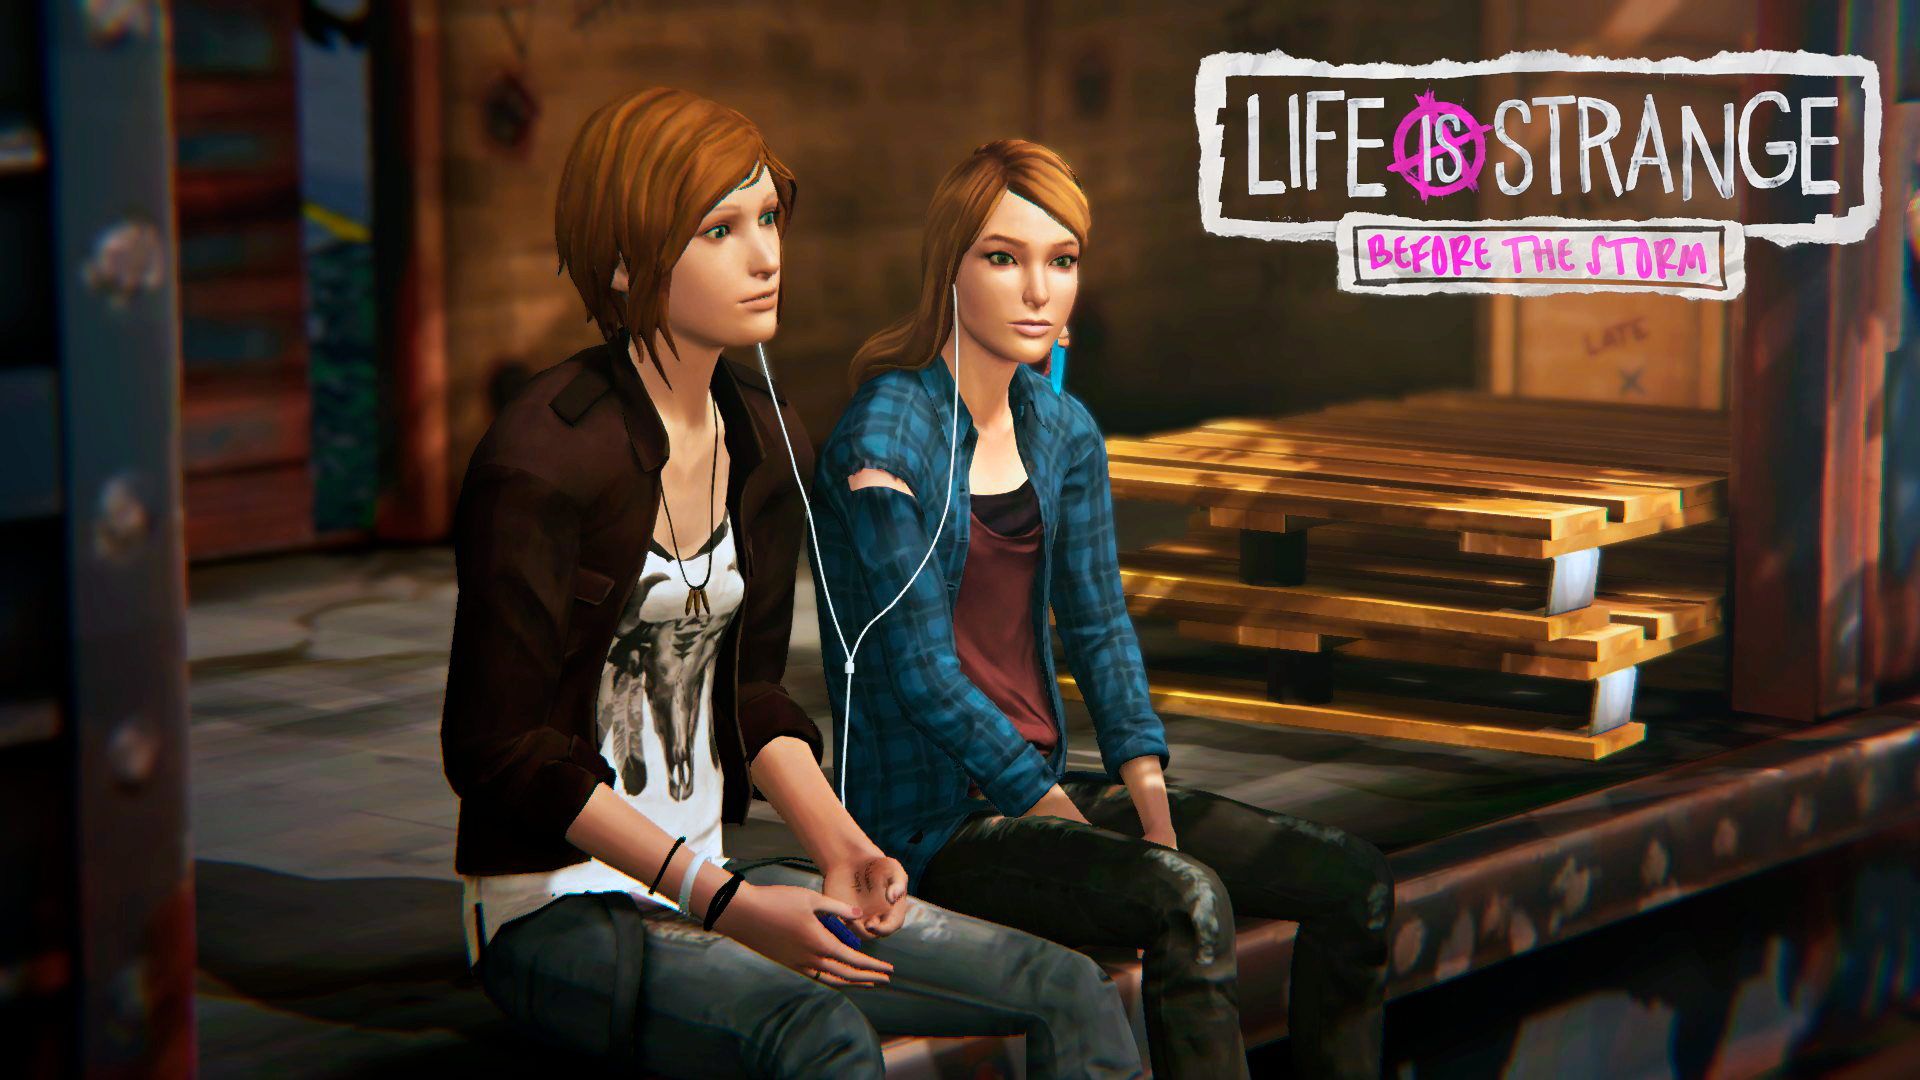 General 1920x1080 Life Is Strange video games Life is Strange Before the Storm Chloe Price Rachel Amber video game characters